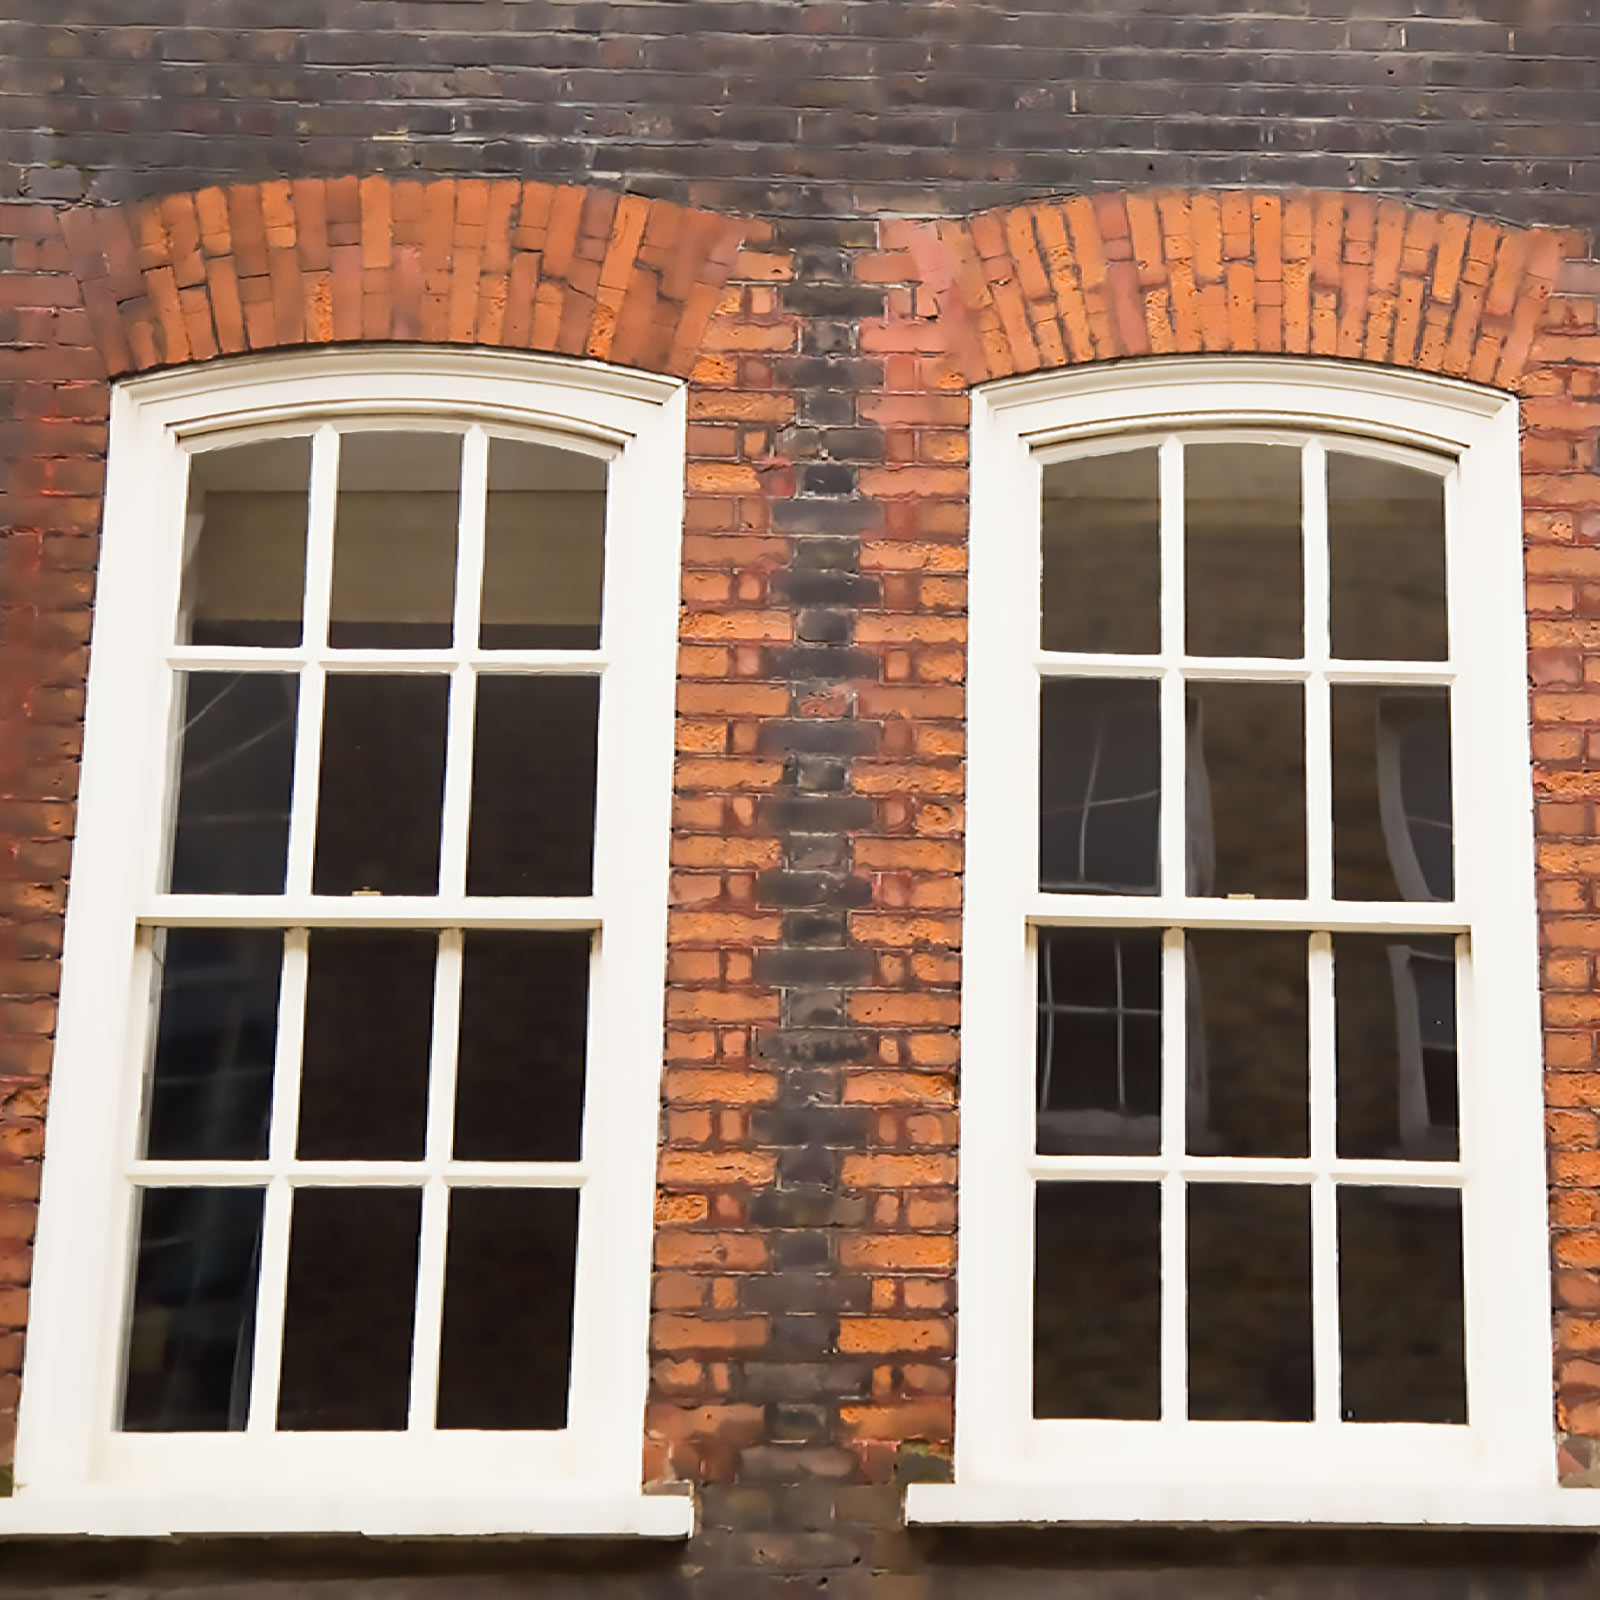 PH Painting Services Specialist in Sash Window Restoration